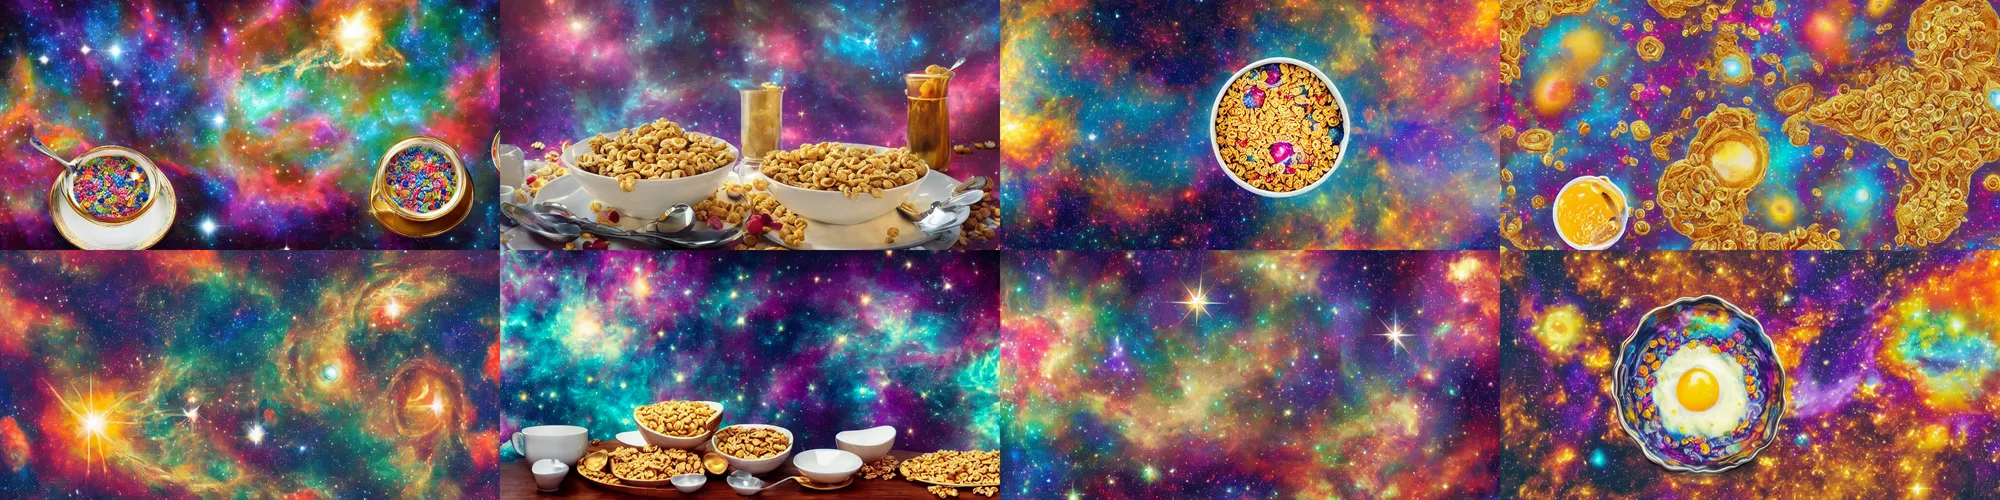 Prompt: a picture of a breakfast table with a cereal bowl filled with a nebula, highly ornate, detailed, colorful